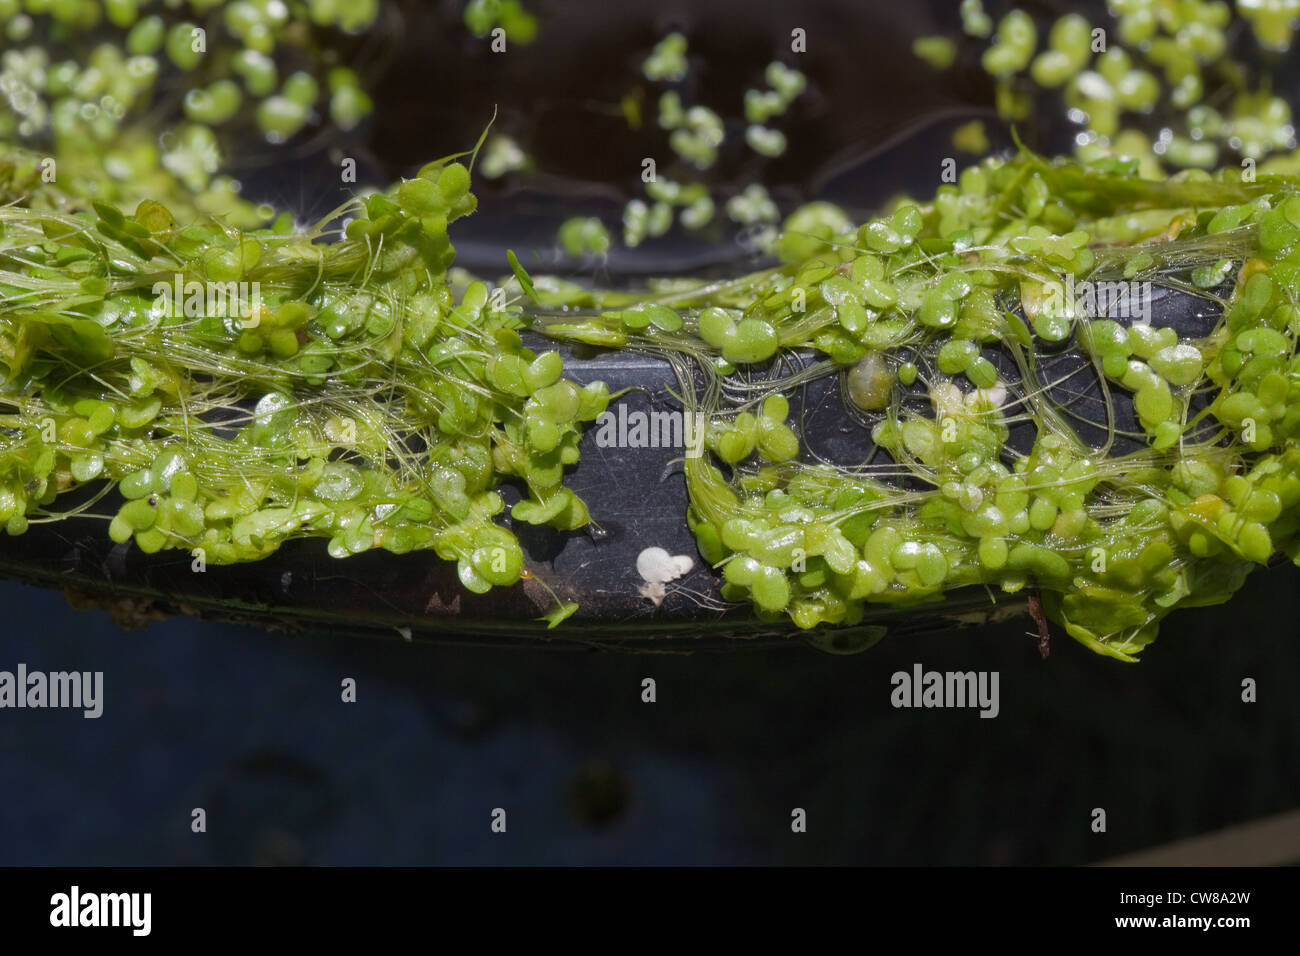 Duckweed (Lemna sp. ). Caught up on the rim of a black plastic bucket. Stock Photo